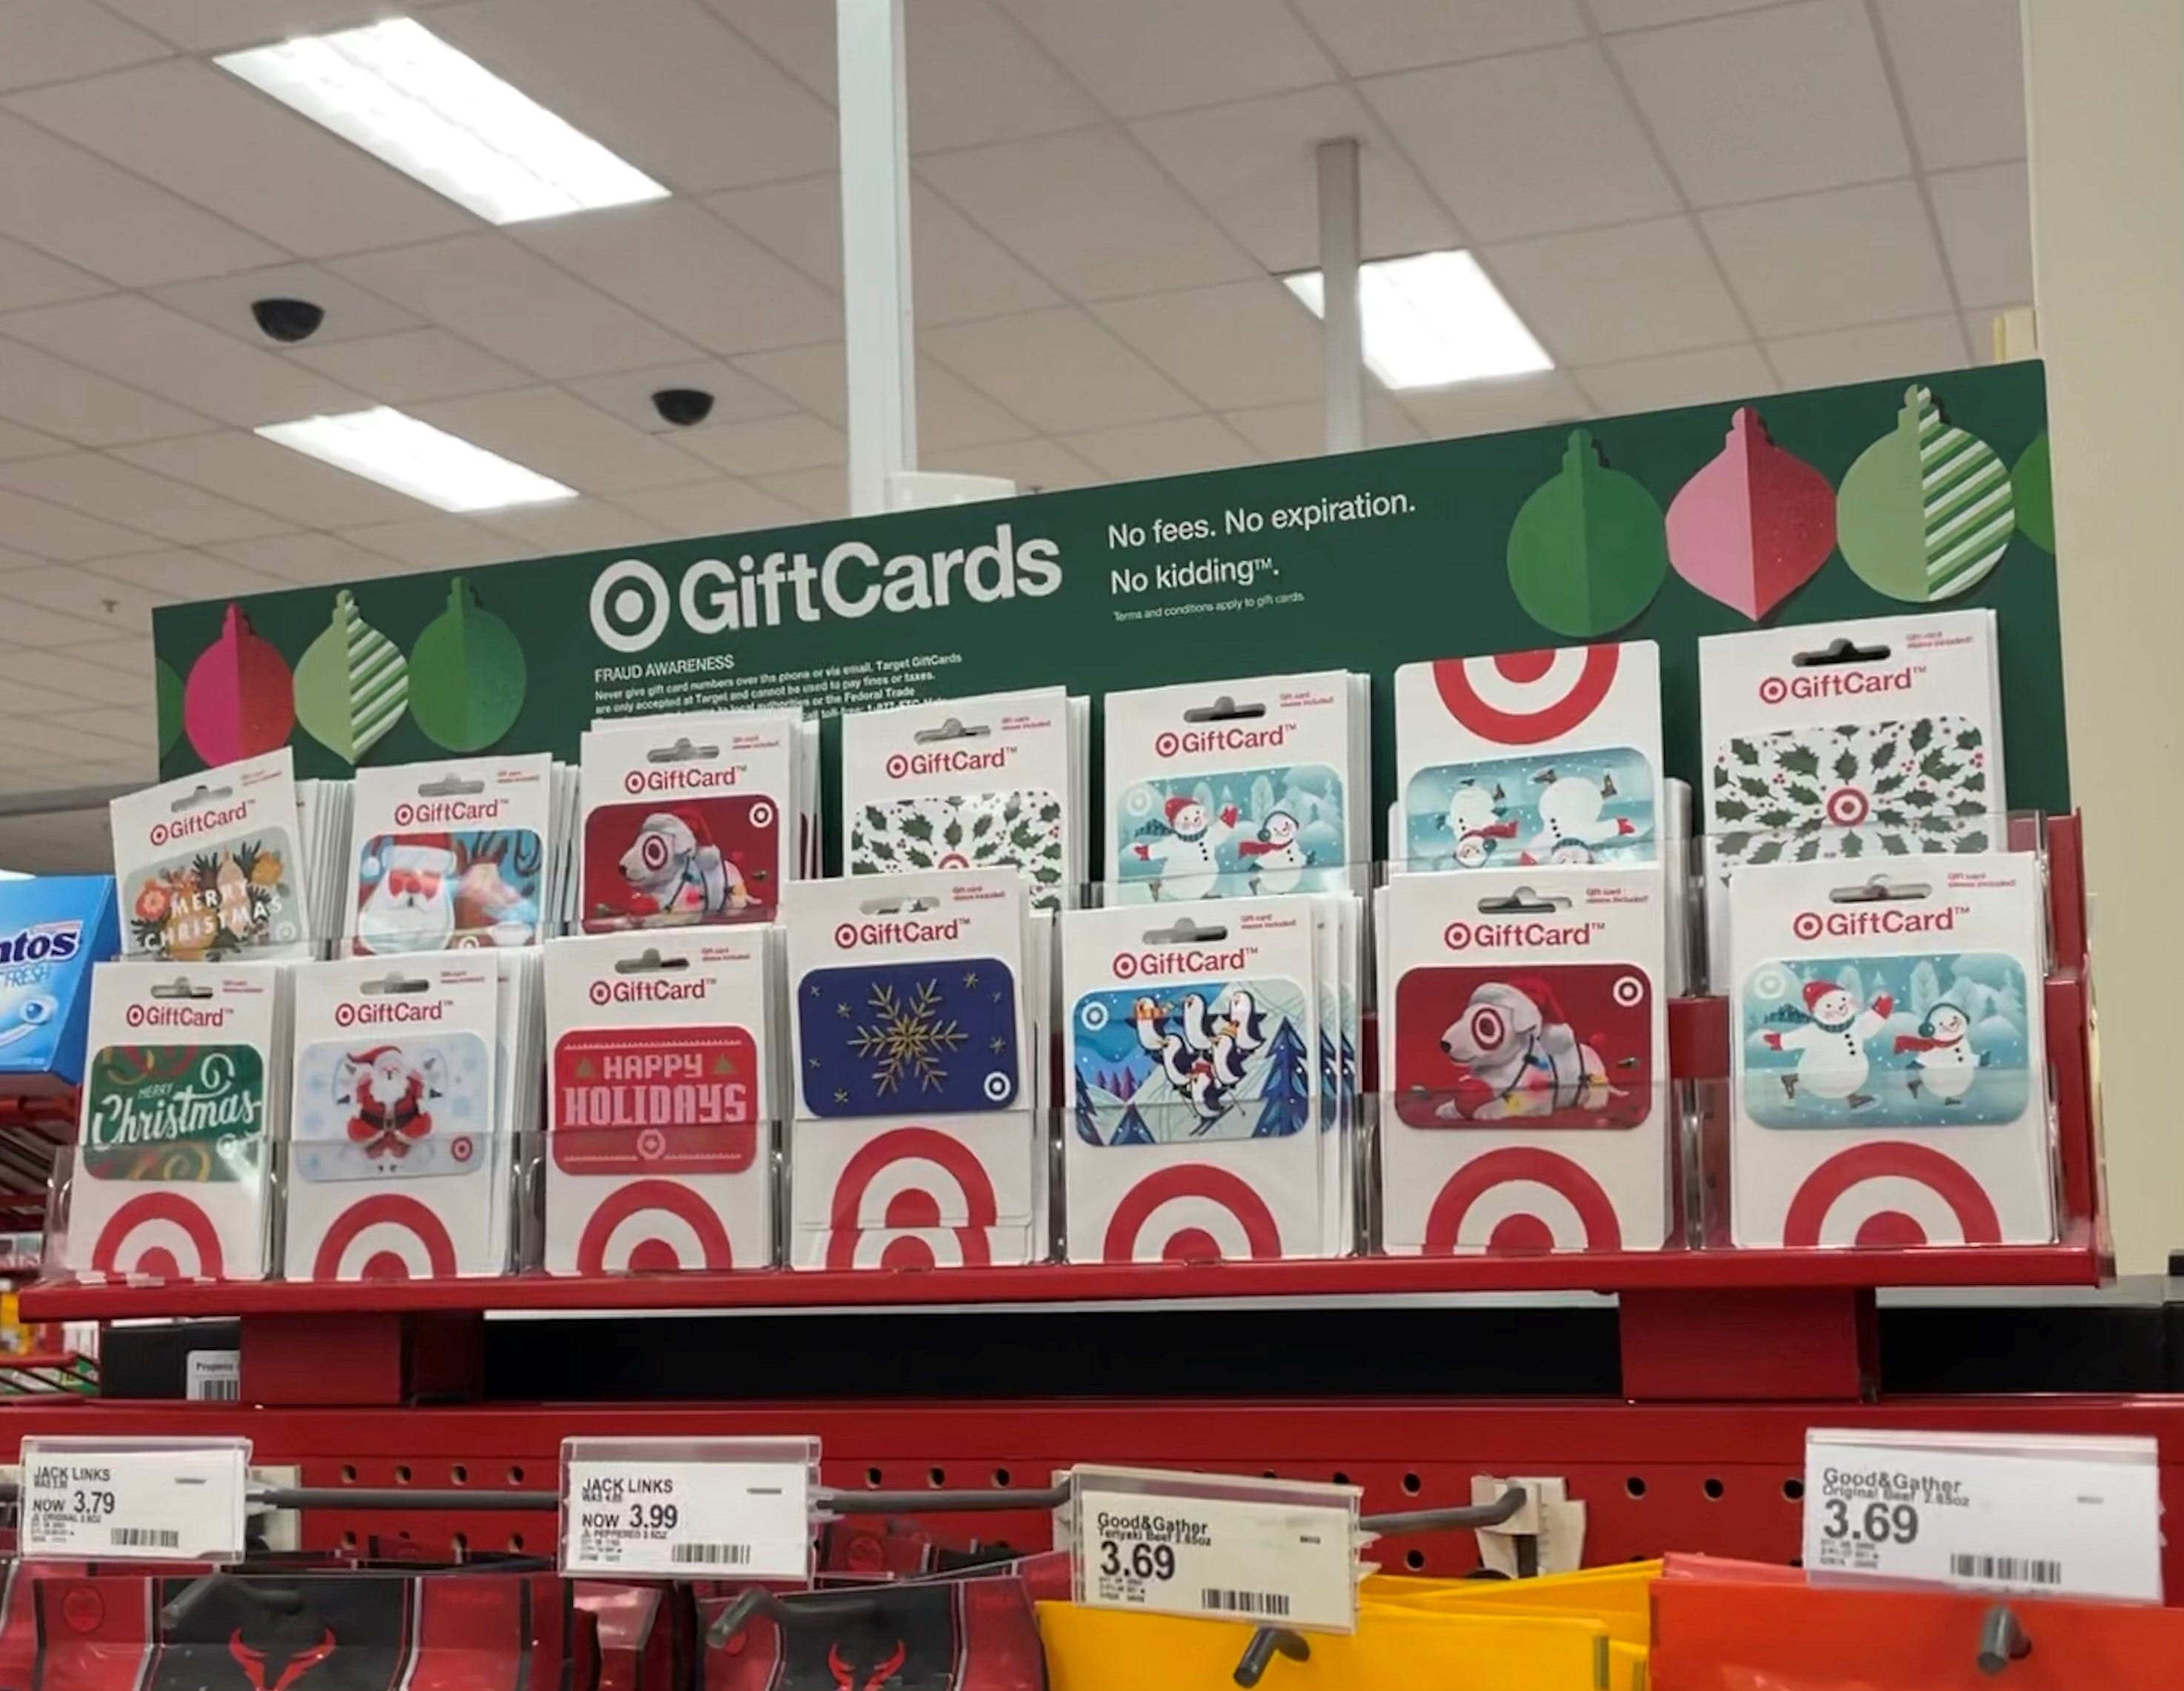 Target Gift Card Discount 2020 Save 10 Percent On Gift Cards Dec 5 6 - target roblox gift card virtual